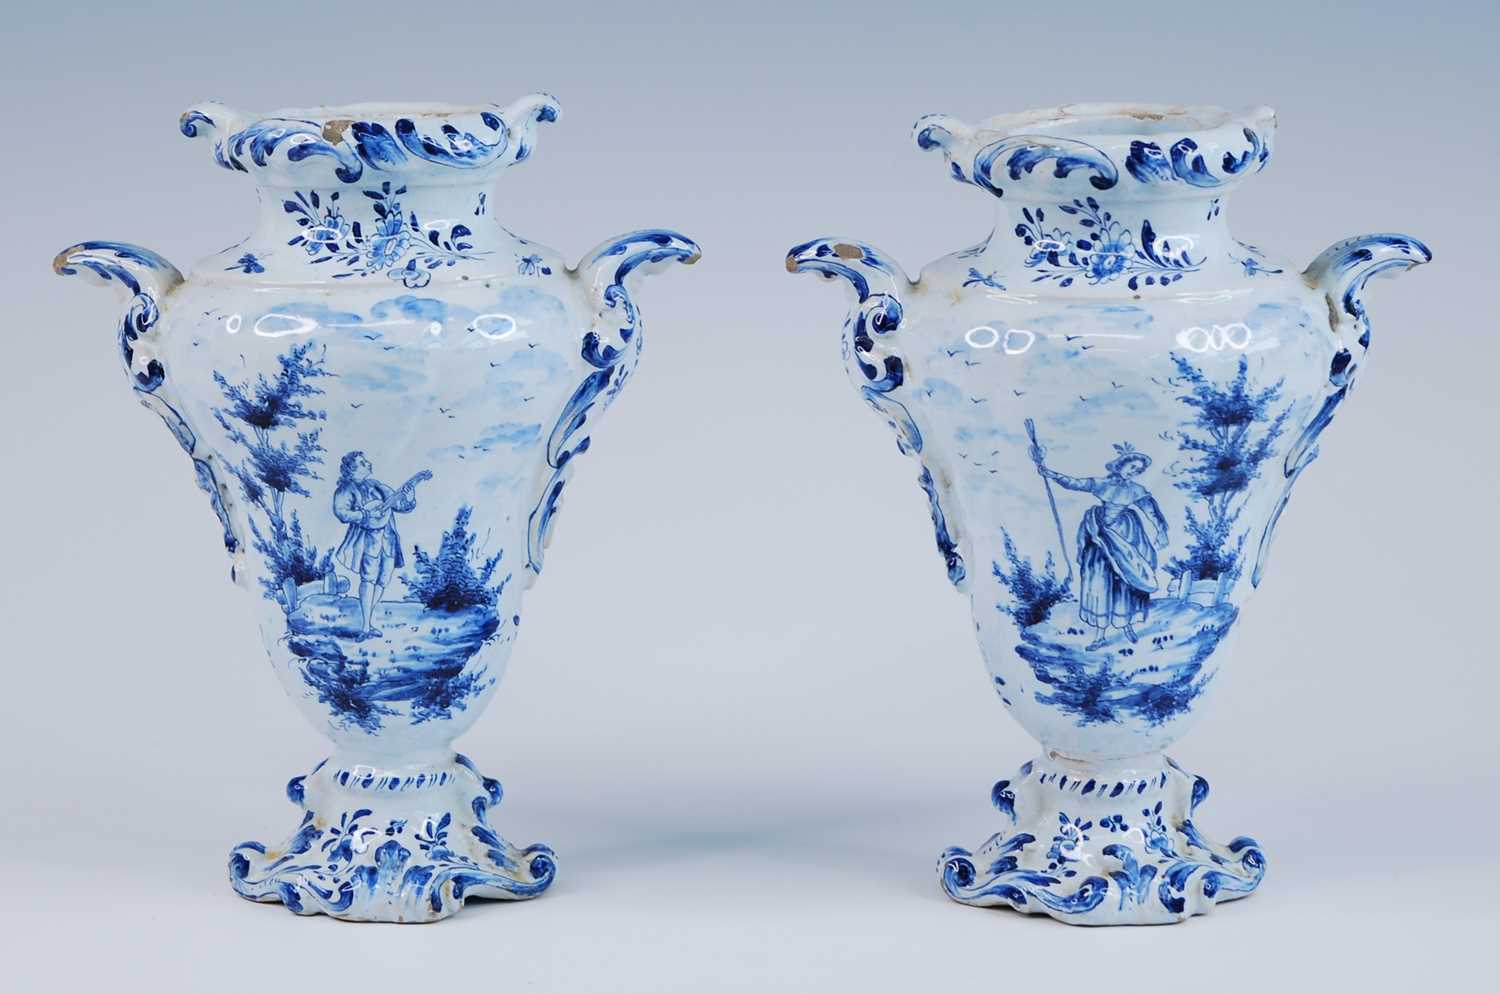 A pair of Delft blue and white vases, late 17th/18th century, each of wrythen form, flanked by C-